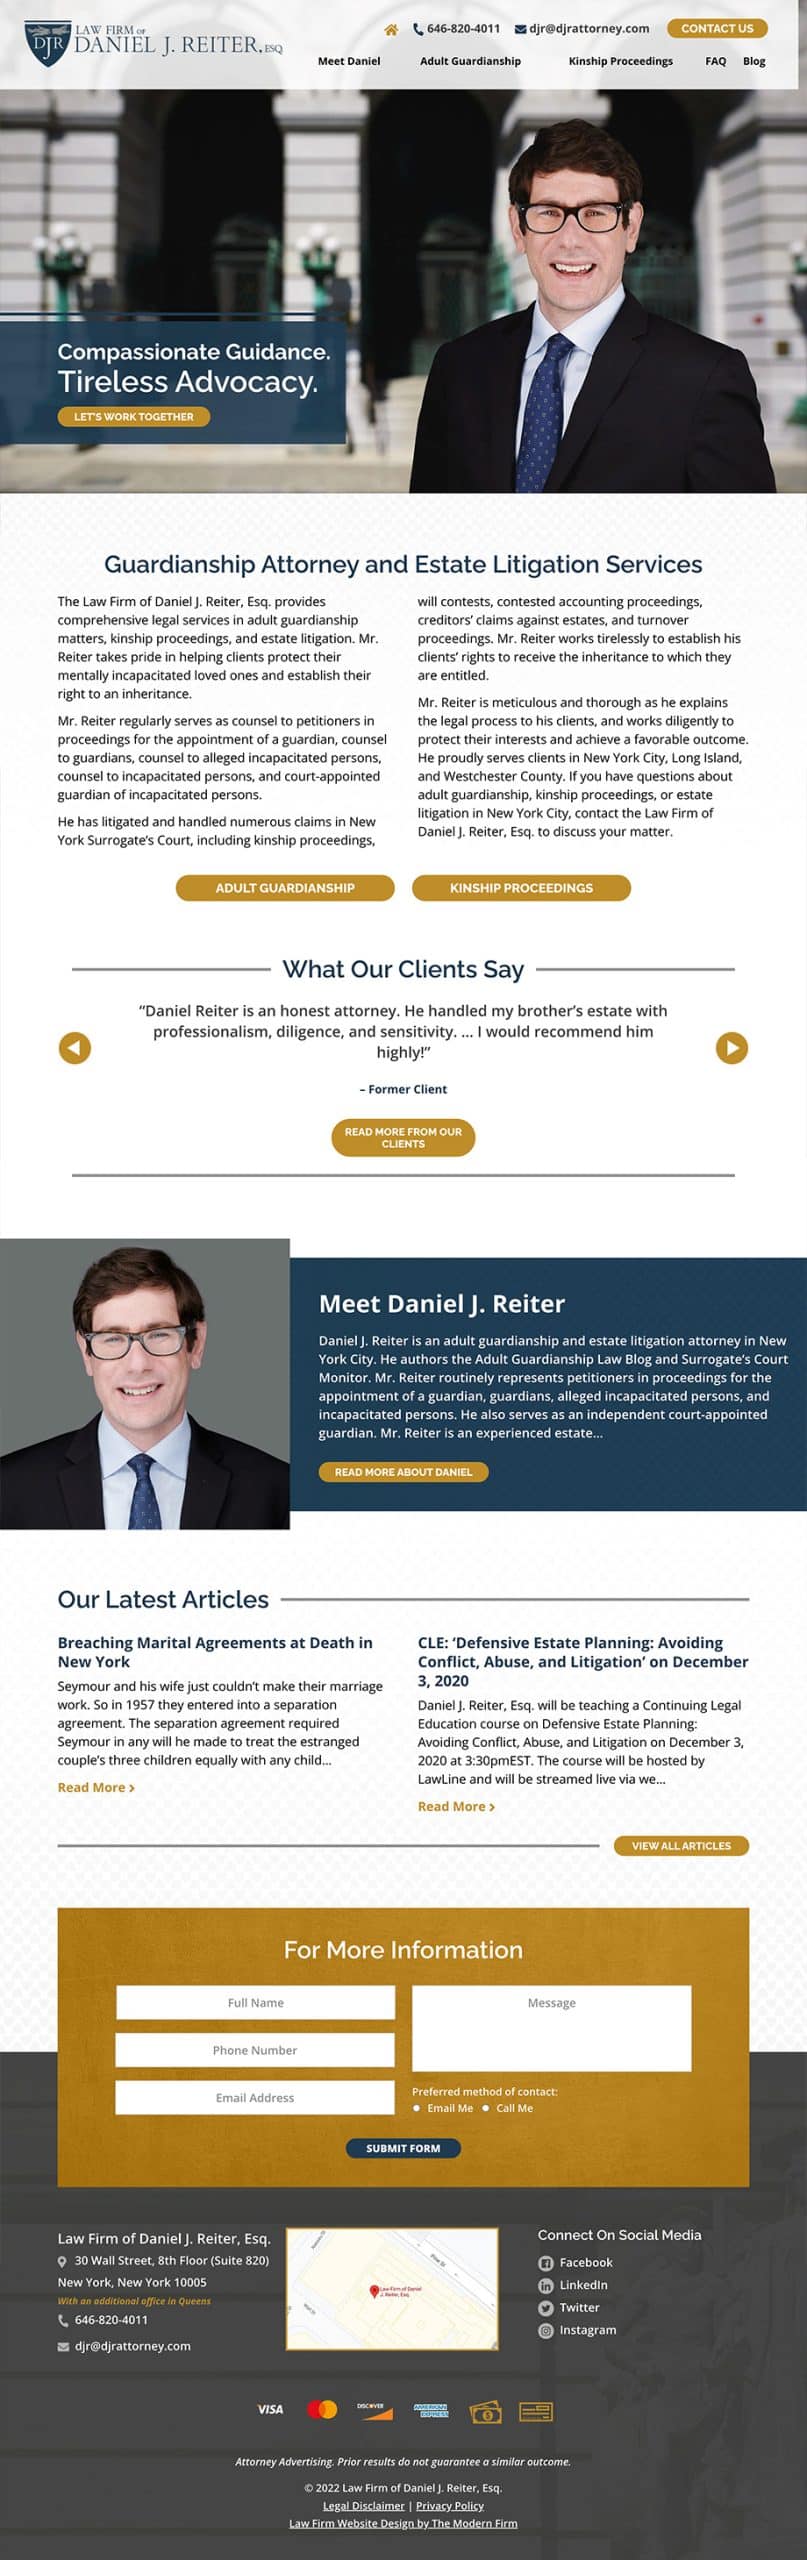 Law Firm Website for Law Firm of Daniel J. Reiter, Esq.